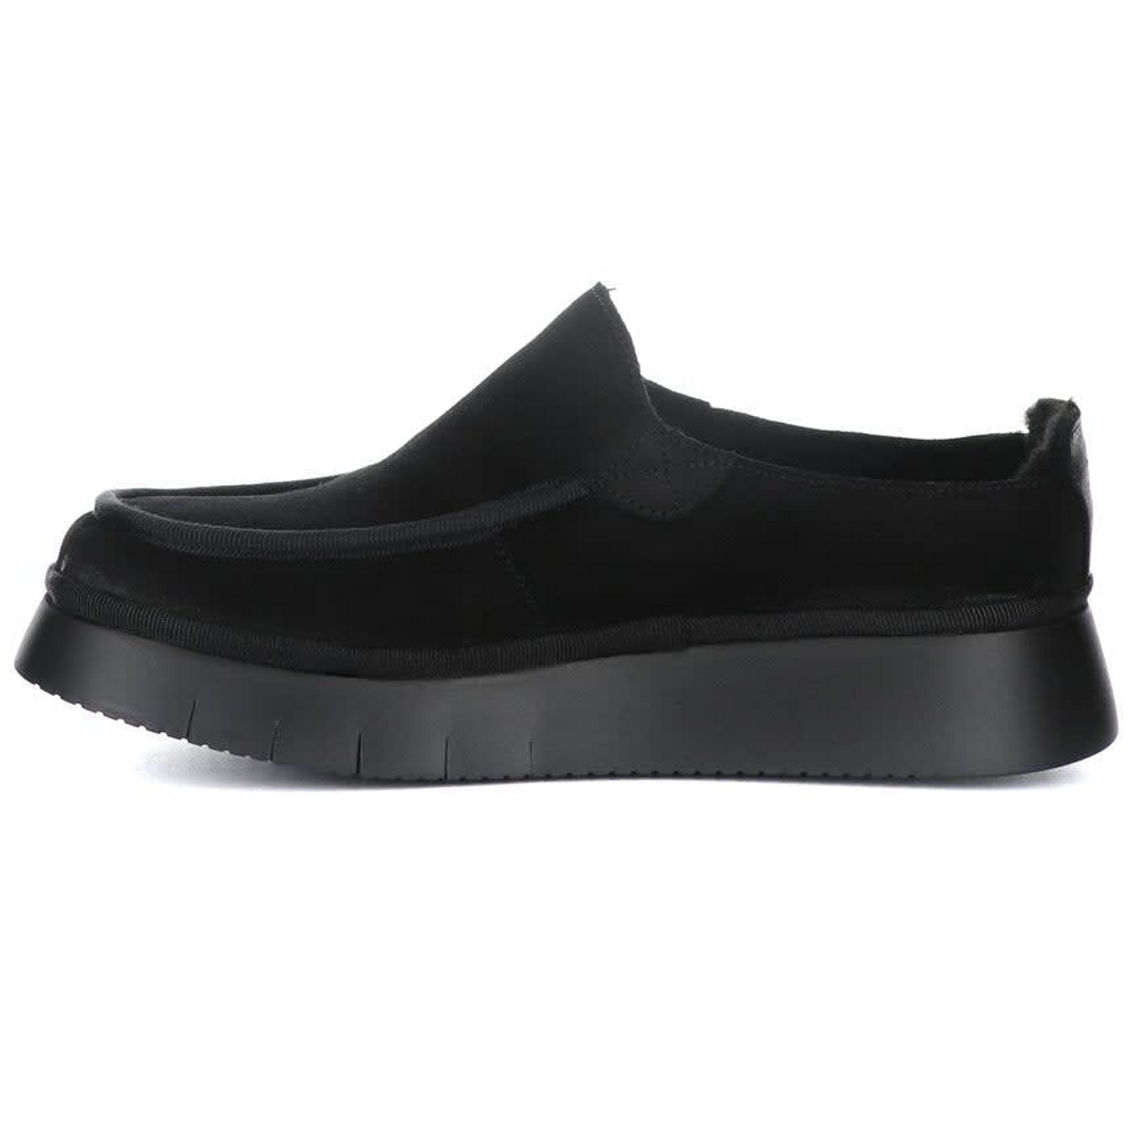 FLY London Ceze Suede Clog - Image 2 of 2